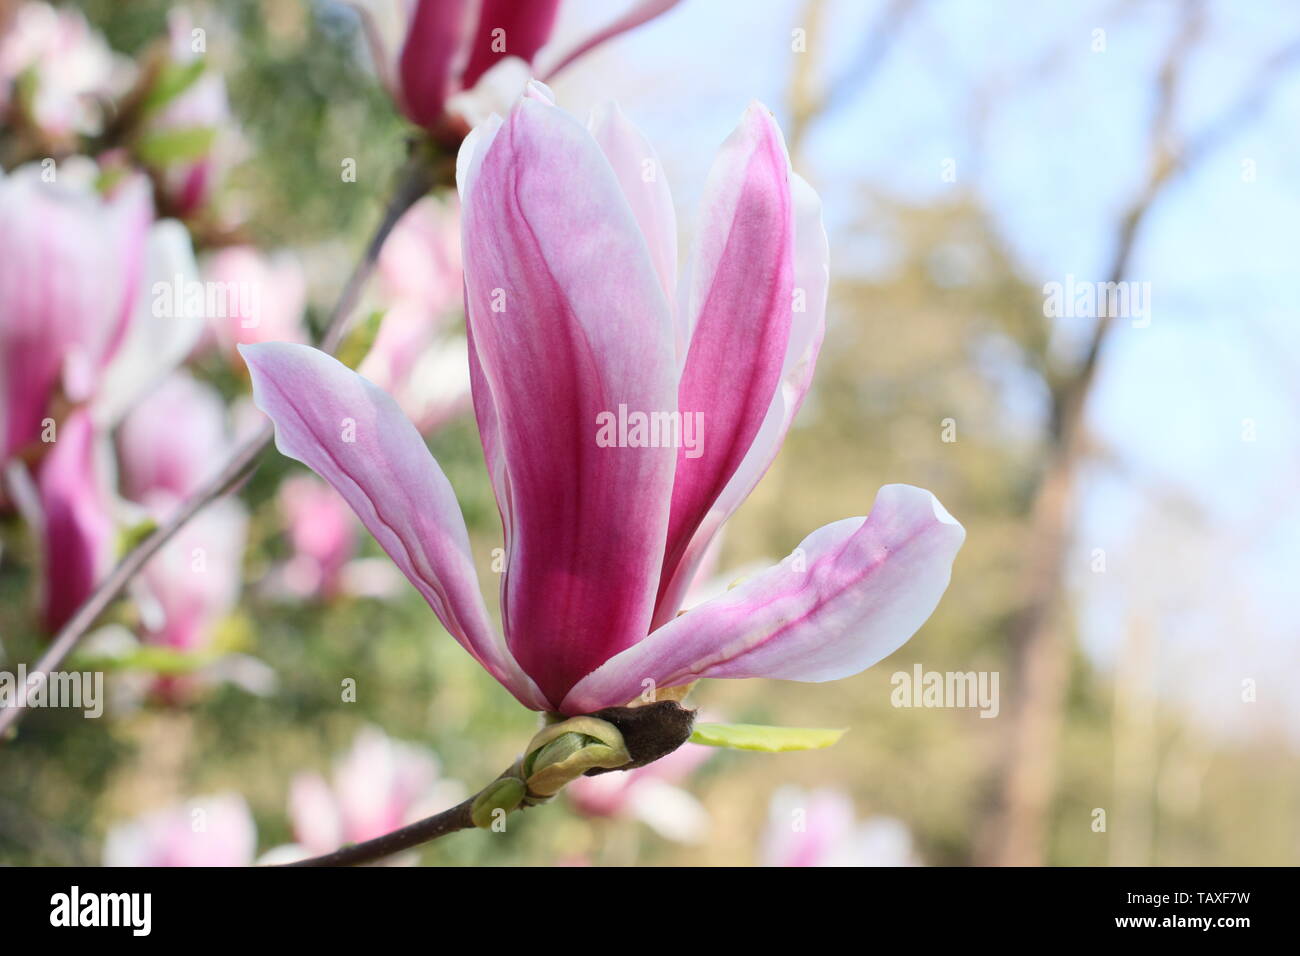 Magnolia x soulangeana ' Picture'. Rosy pink and white blossoms of hardy Magnolia 'Picture'. Also called Tulip magnolia. Stock Photo